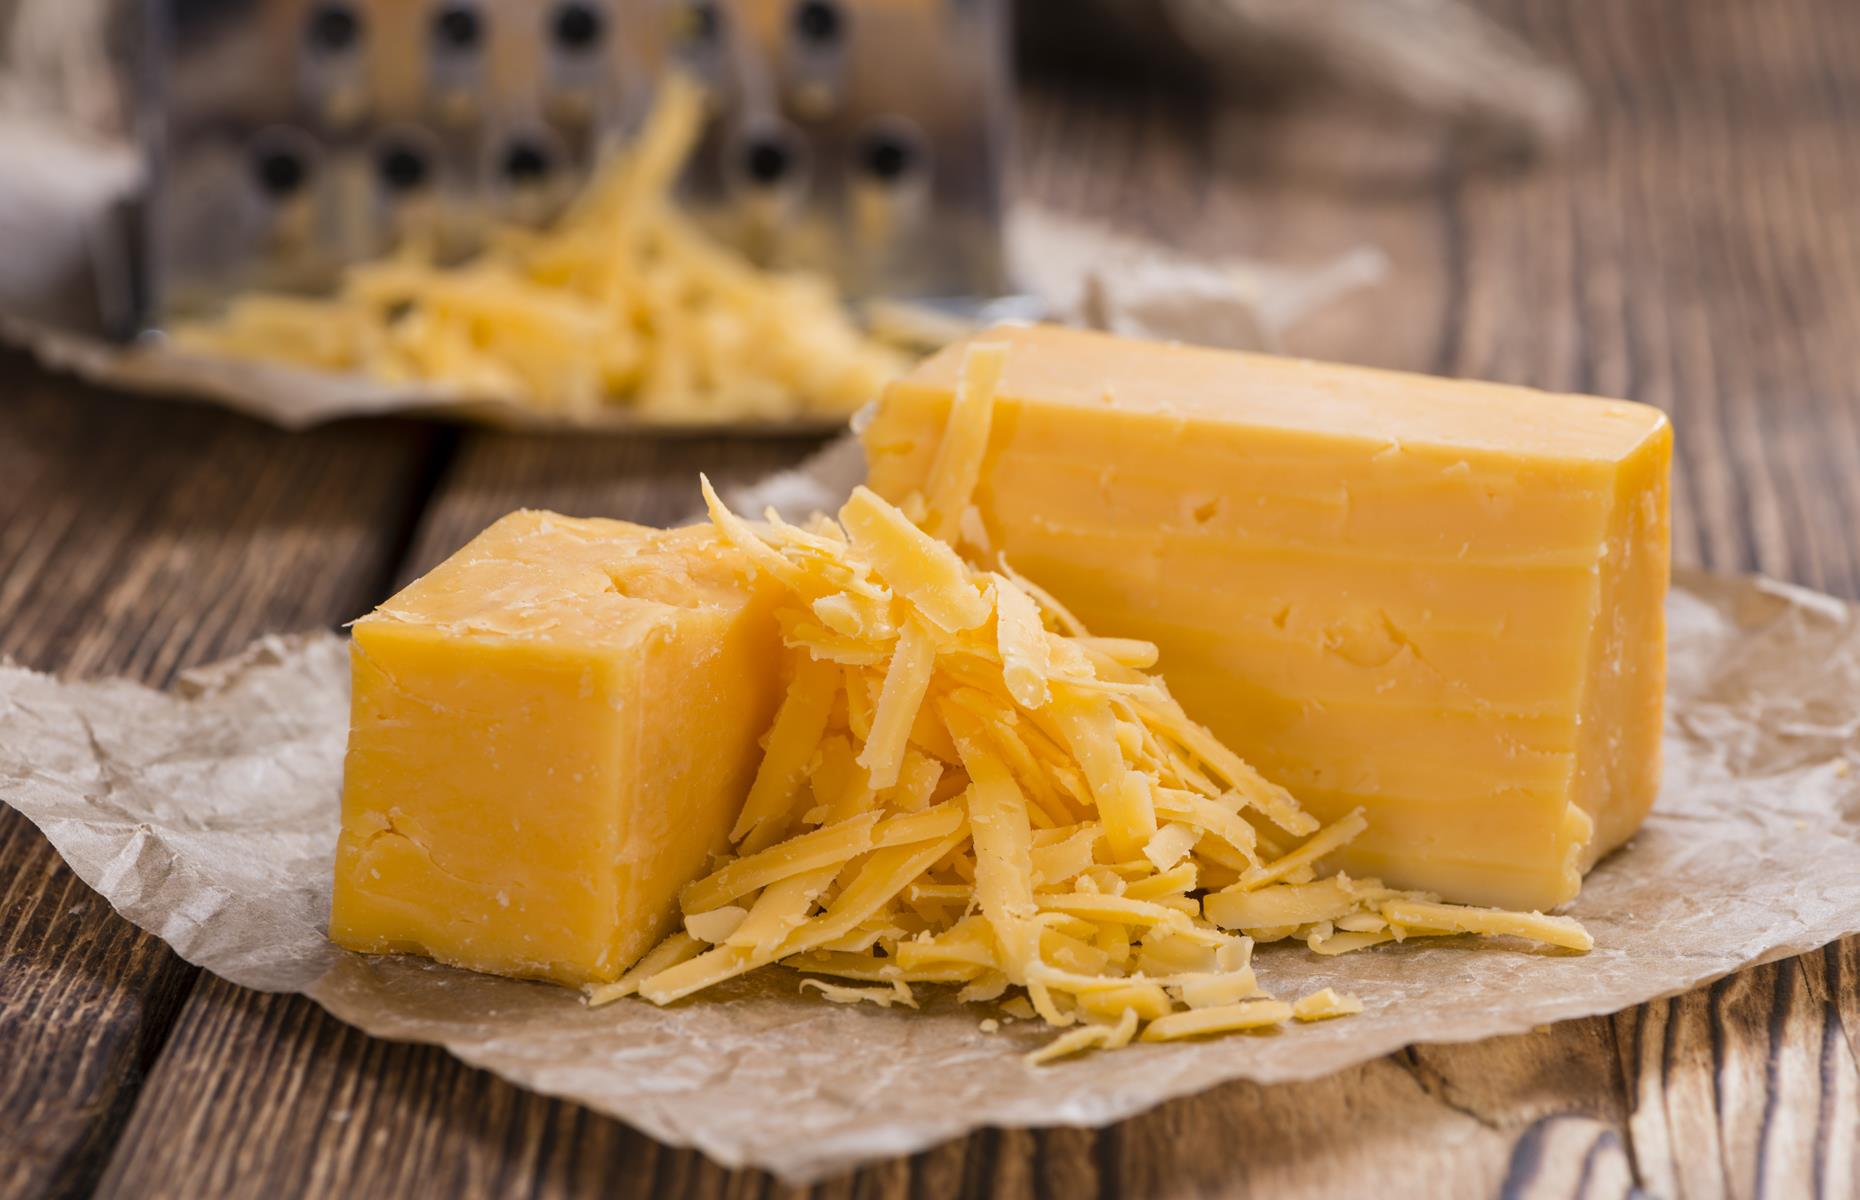 Cheddar is standard but using only one type of cheese can result in a one-dimensional dish. Instead, go for a blend of easy-to-melt cheeses by combining Gouda, Gruyère or Emmental with mature Cheddar. Whisk in finely grated Parmesan for a savory pungency or Comté for a rustic flavor.